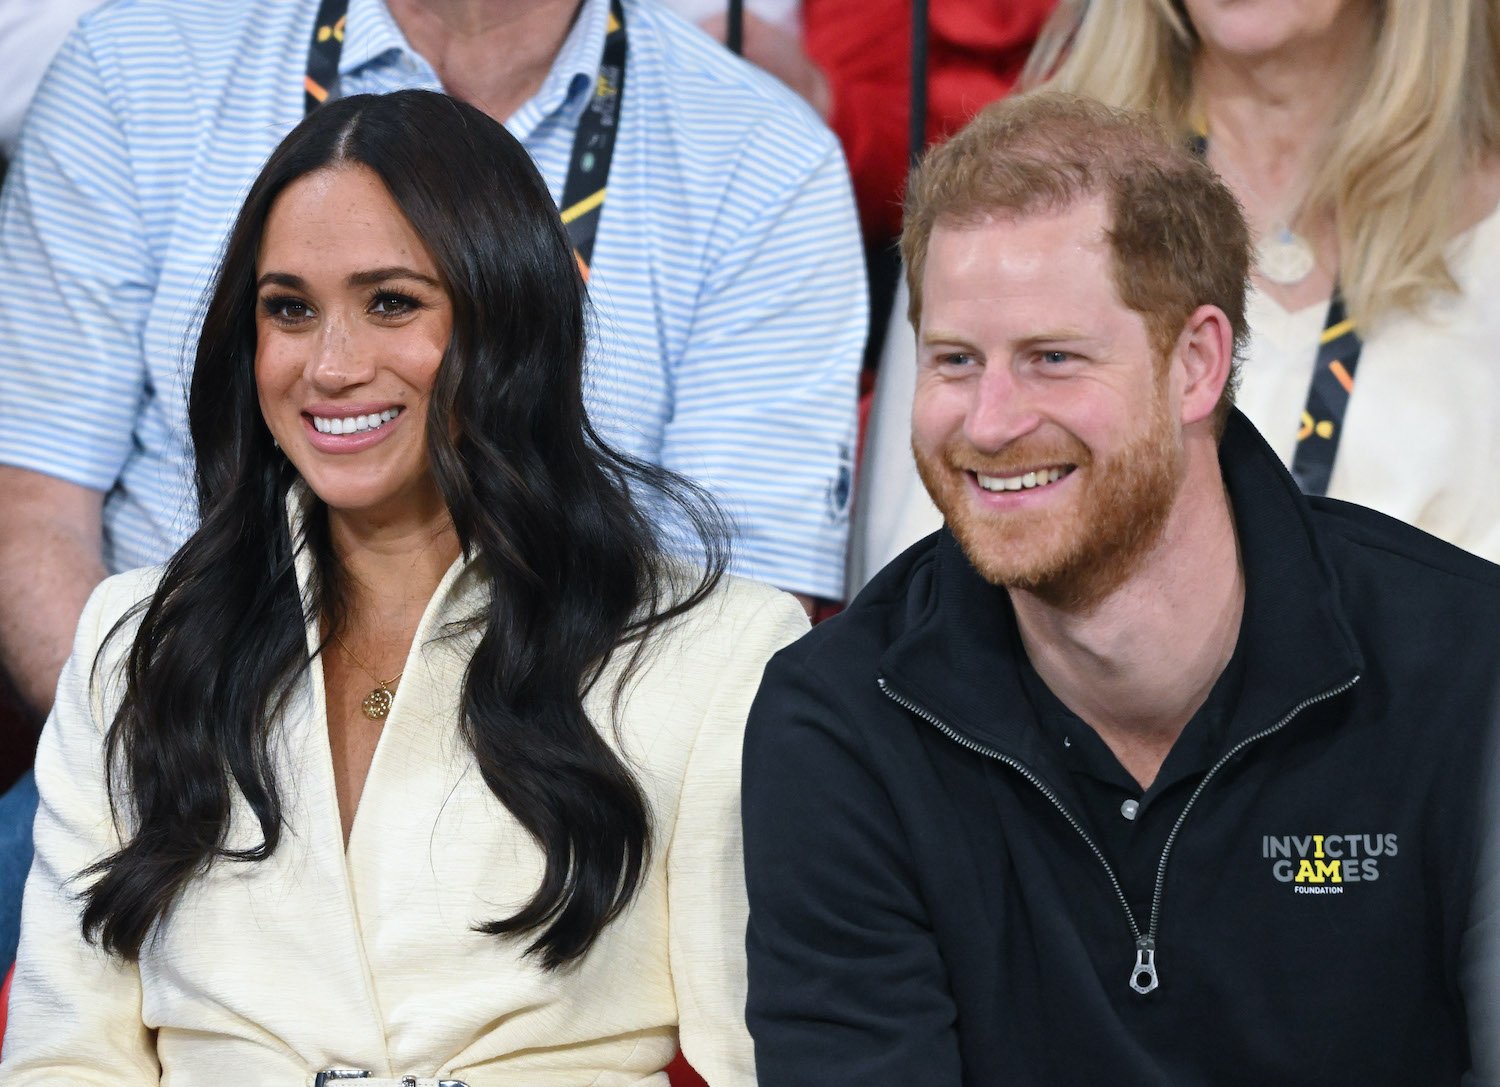 Body Language Expert Points Out Prince Harry’s ‘Sexual Gesture’ in Photo With Meghan Markle